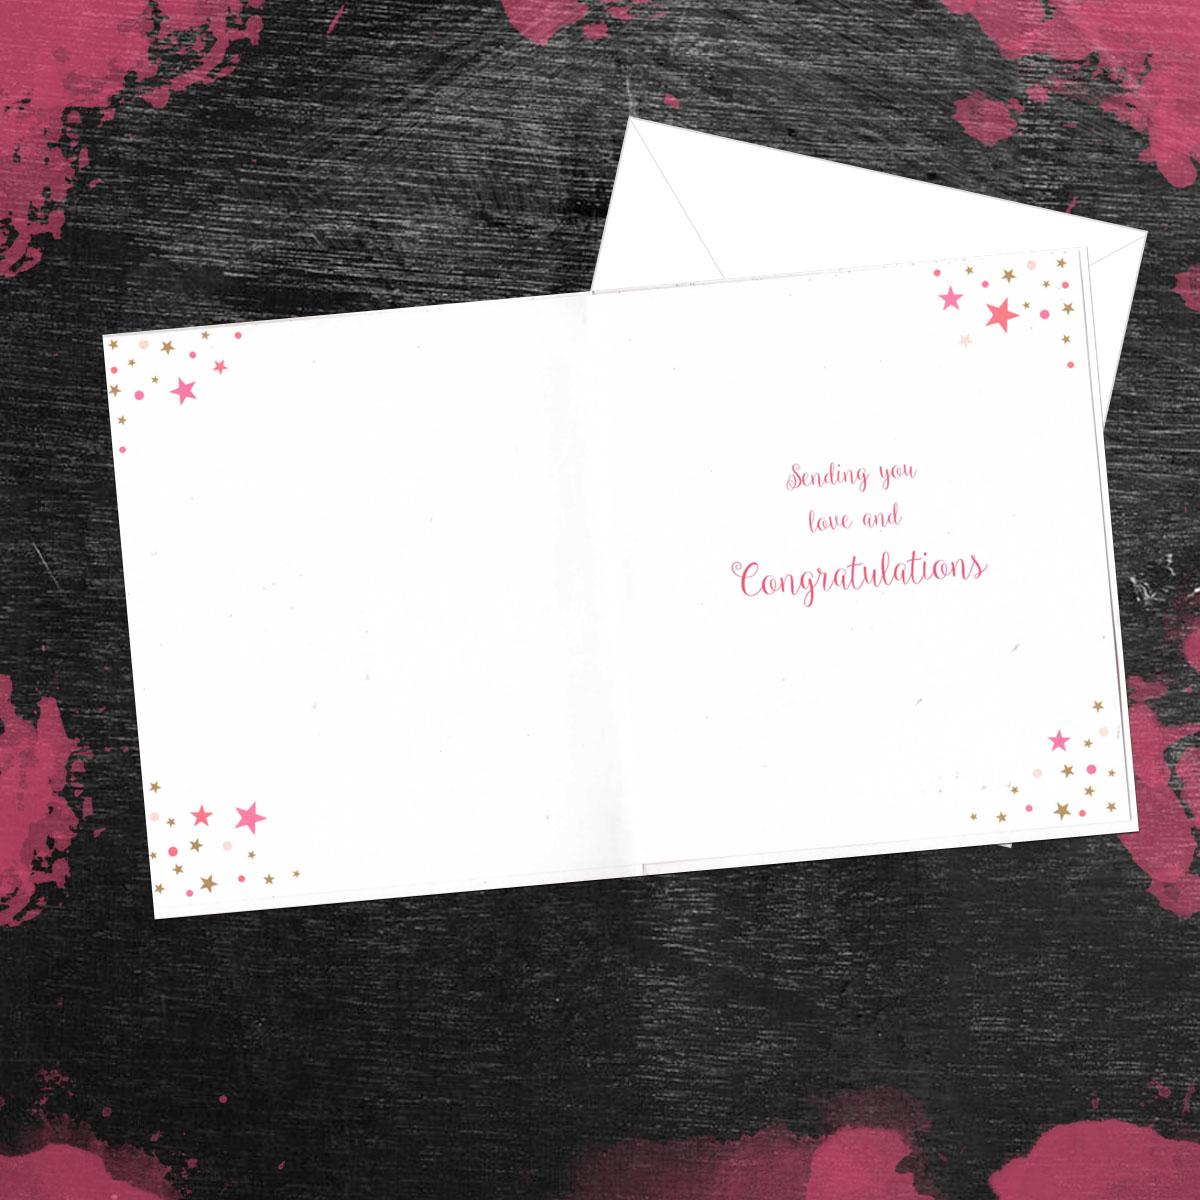 Inside Of Congrats Card To Show Printed Inside